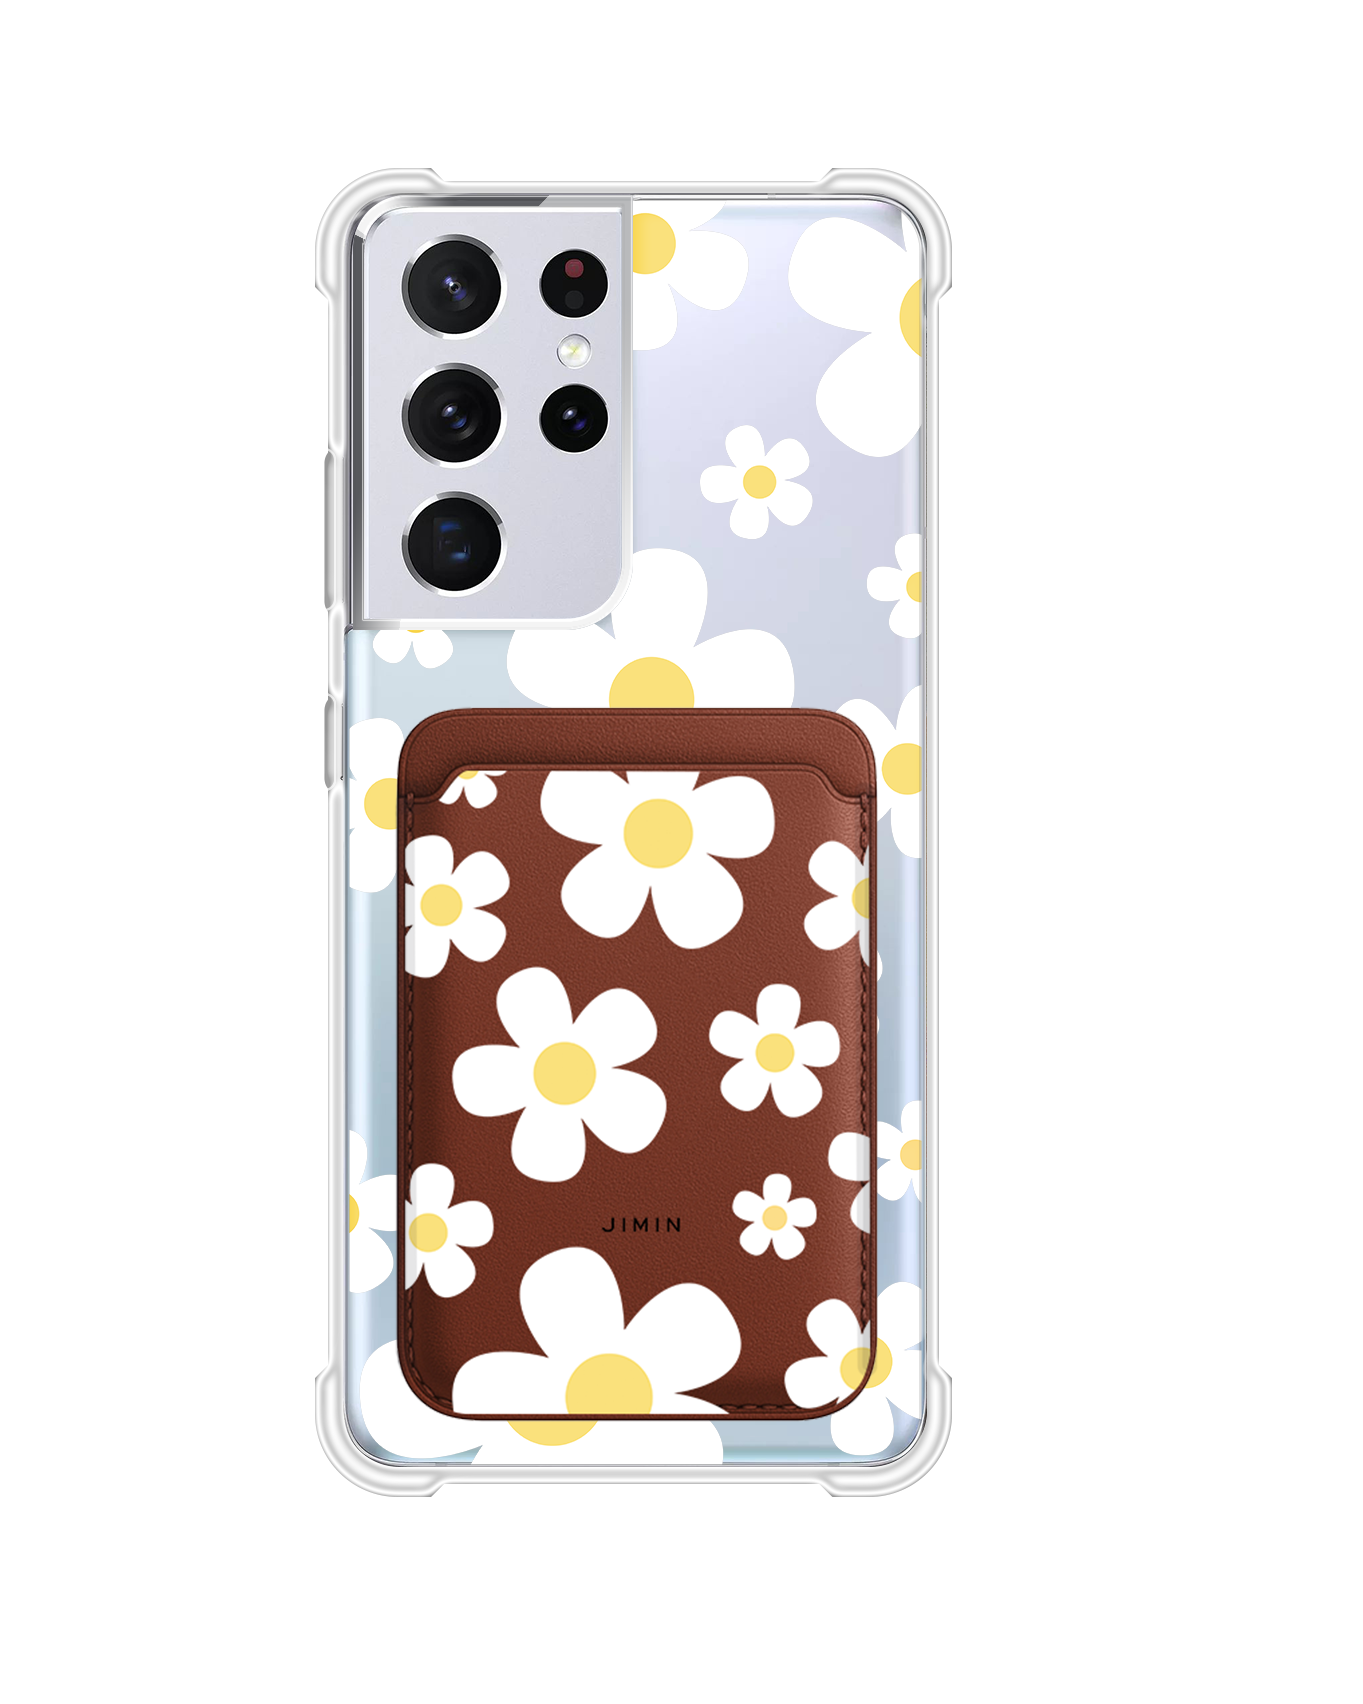 Android Magnetic Wallet Case - Daisy 3.0